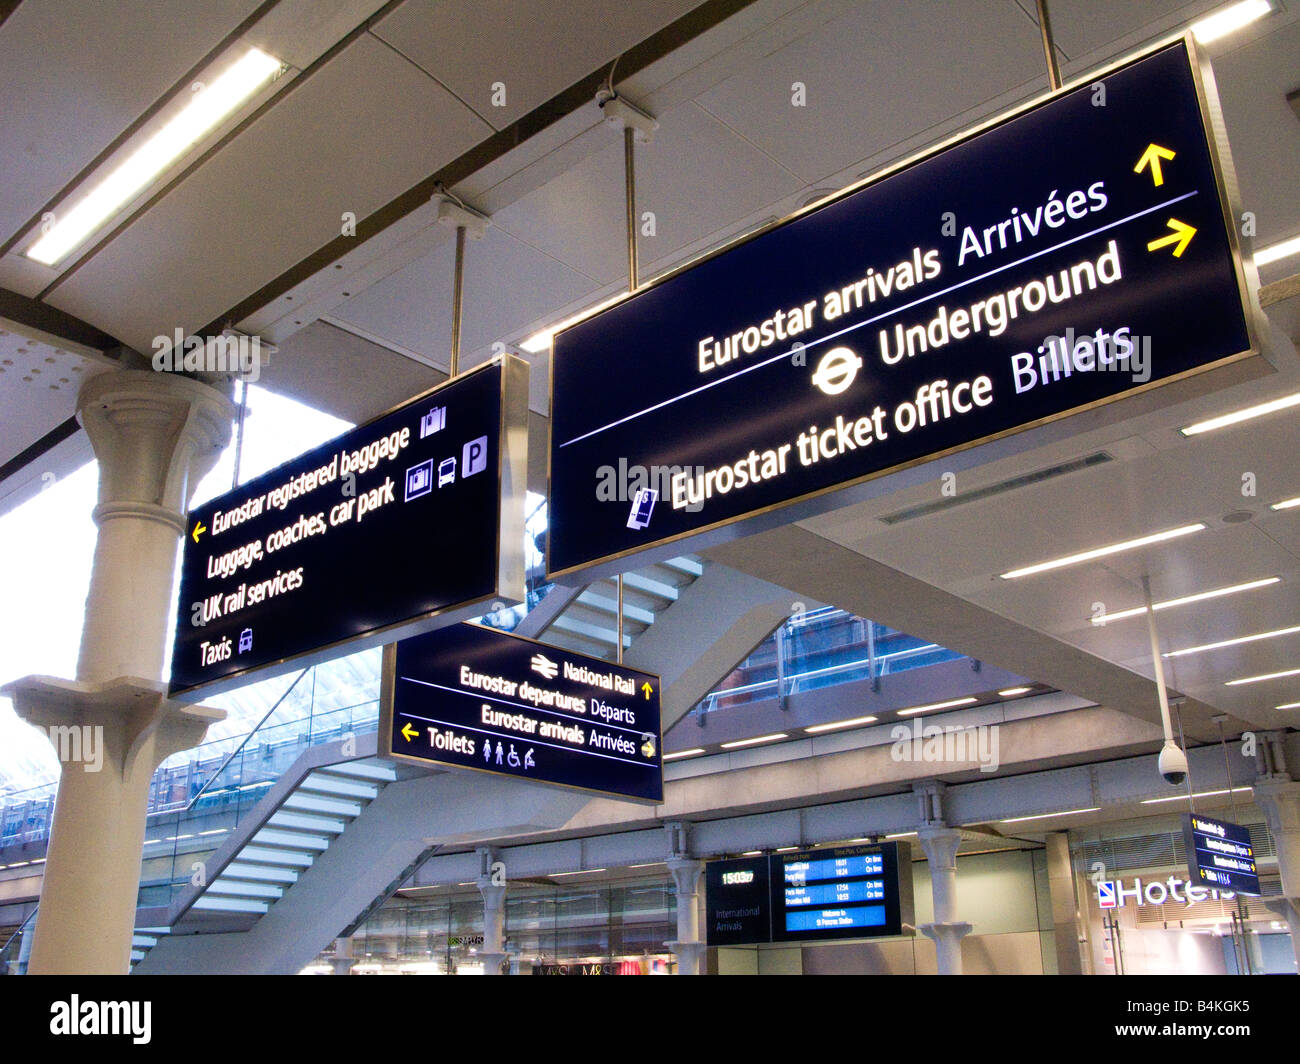 Eurostar signs at the new St.Pancras International Railway Station in London Stock Photo